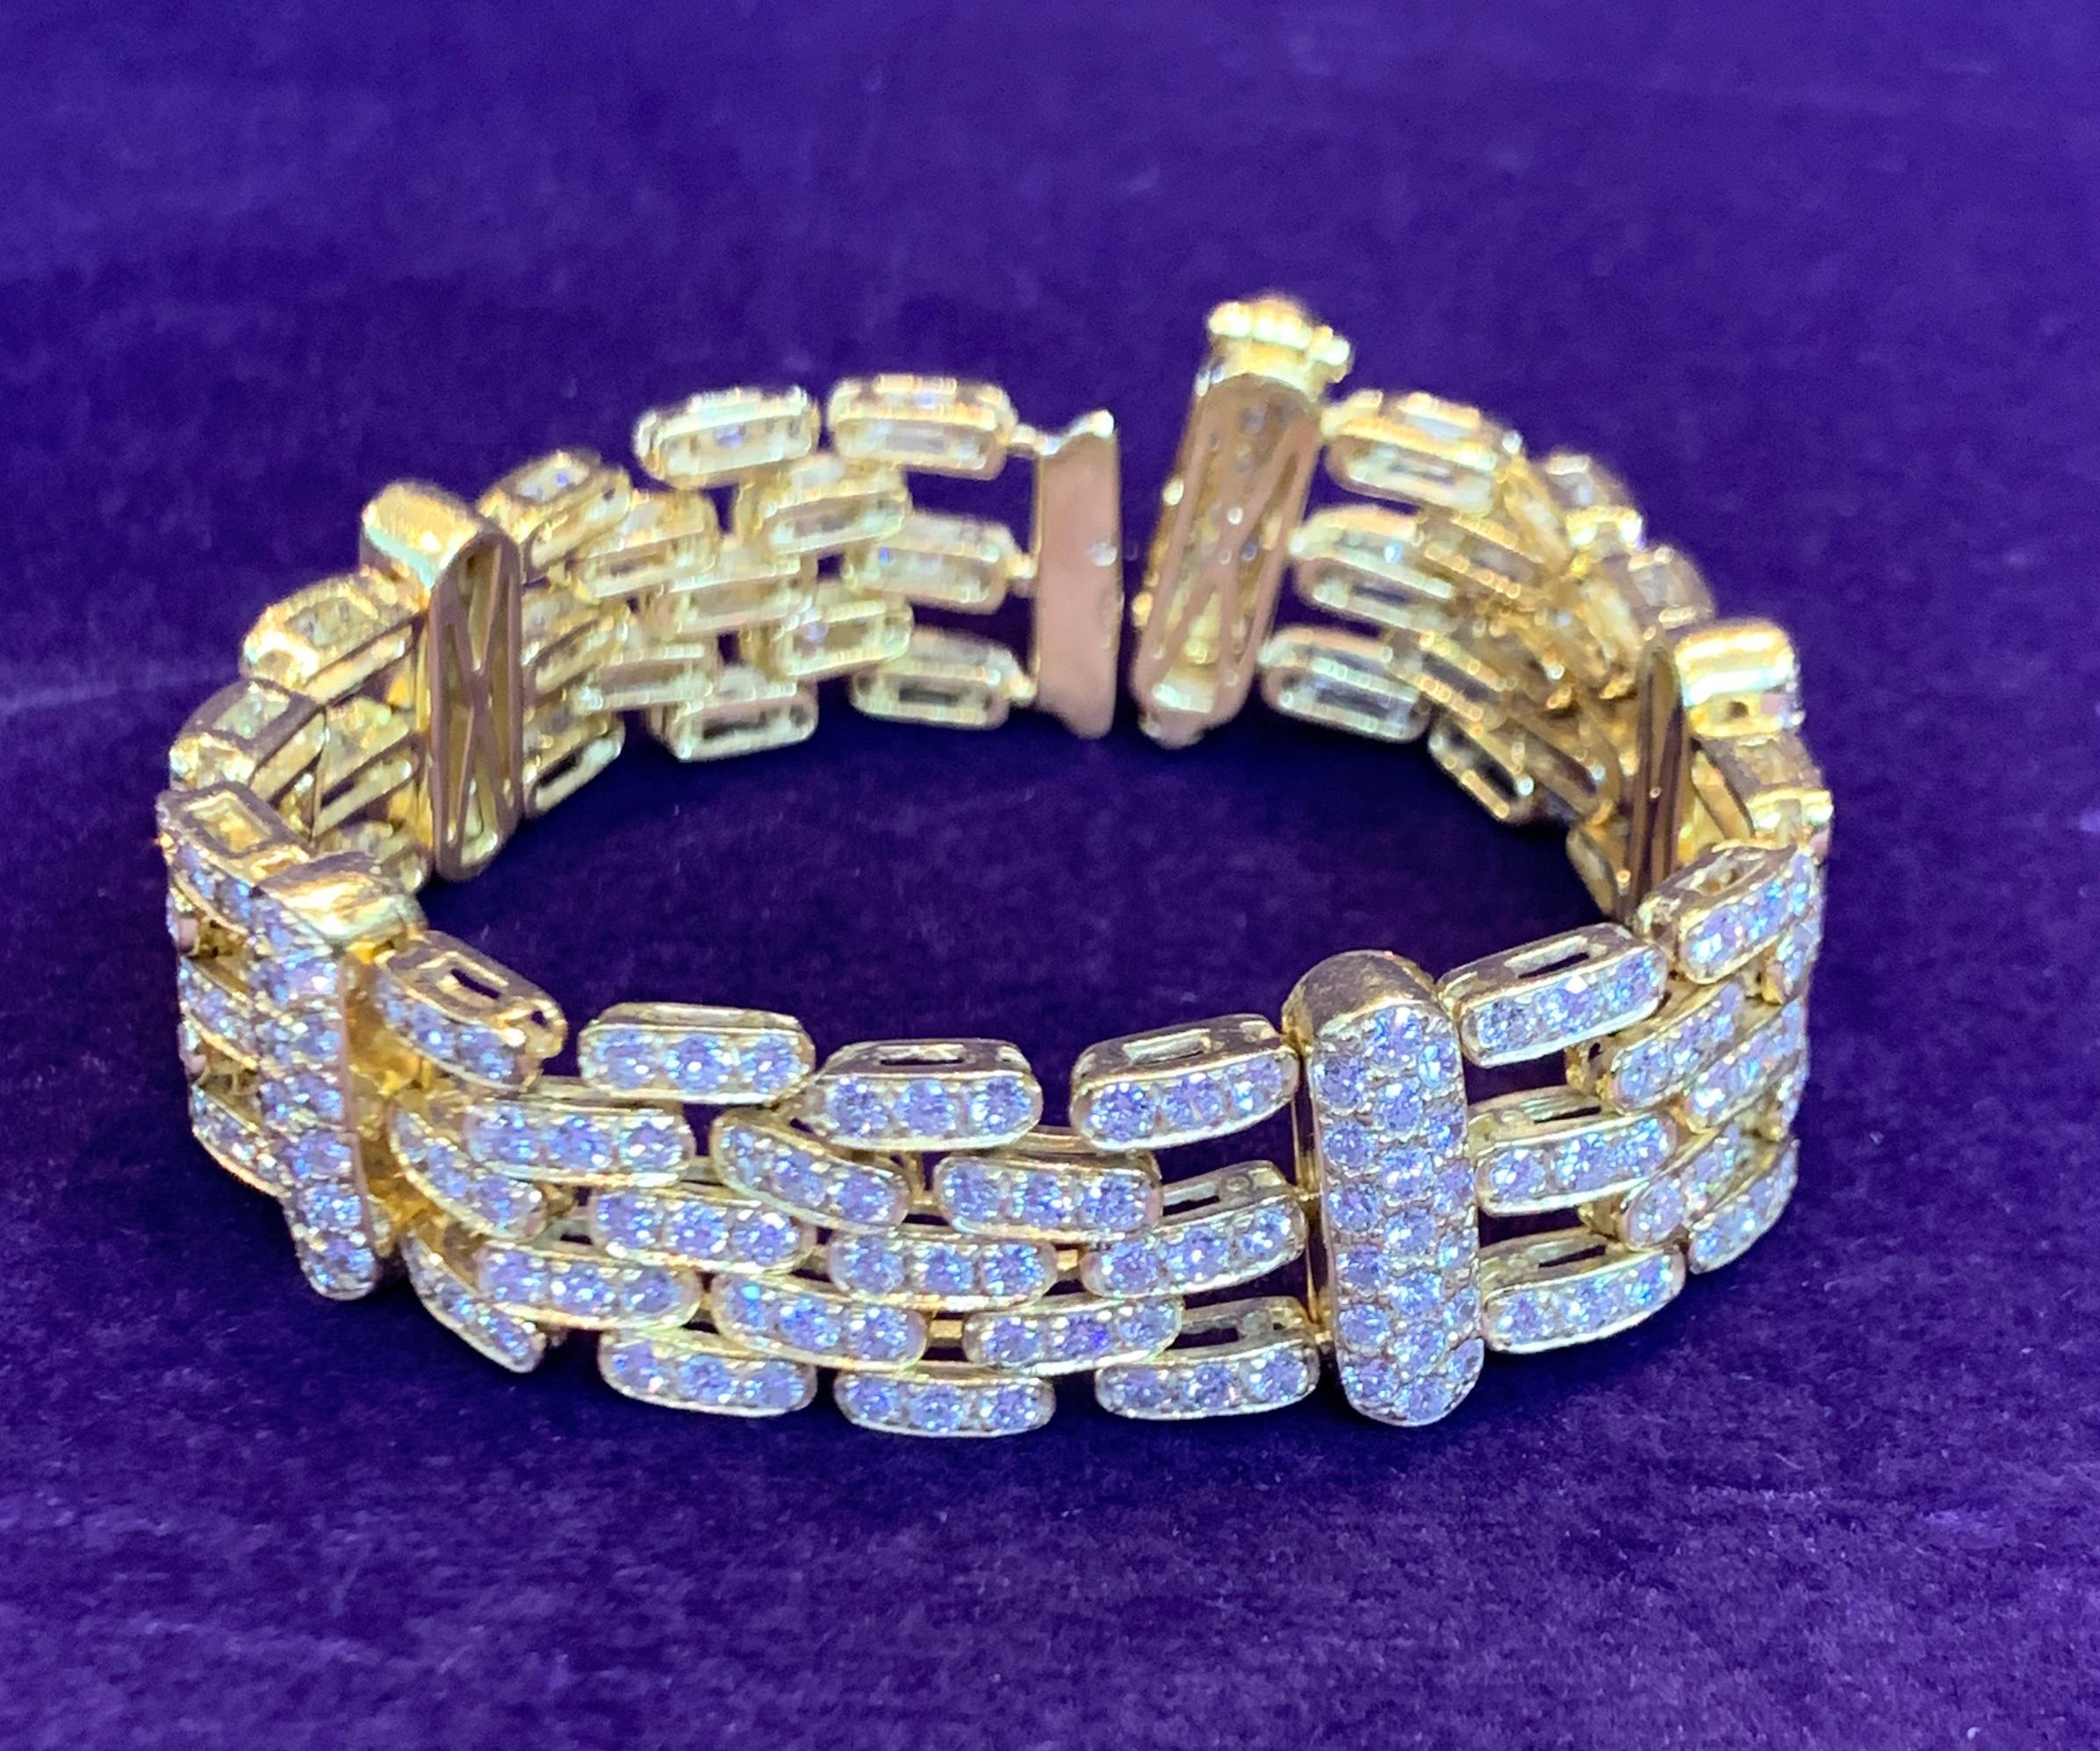 18K yellow gold men's bracelet with 290 brilliant cut diamond weighing approximately 11.80 ct.
Length: 6.5